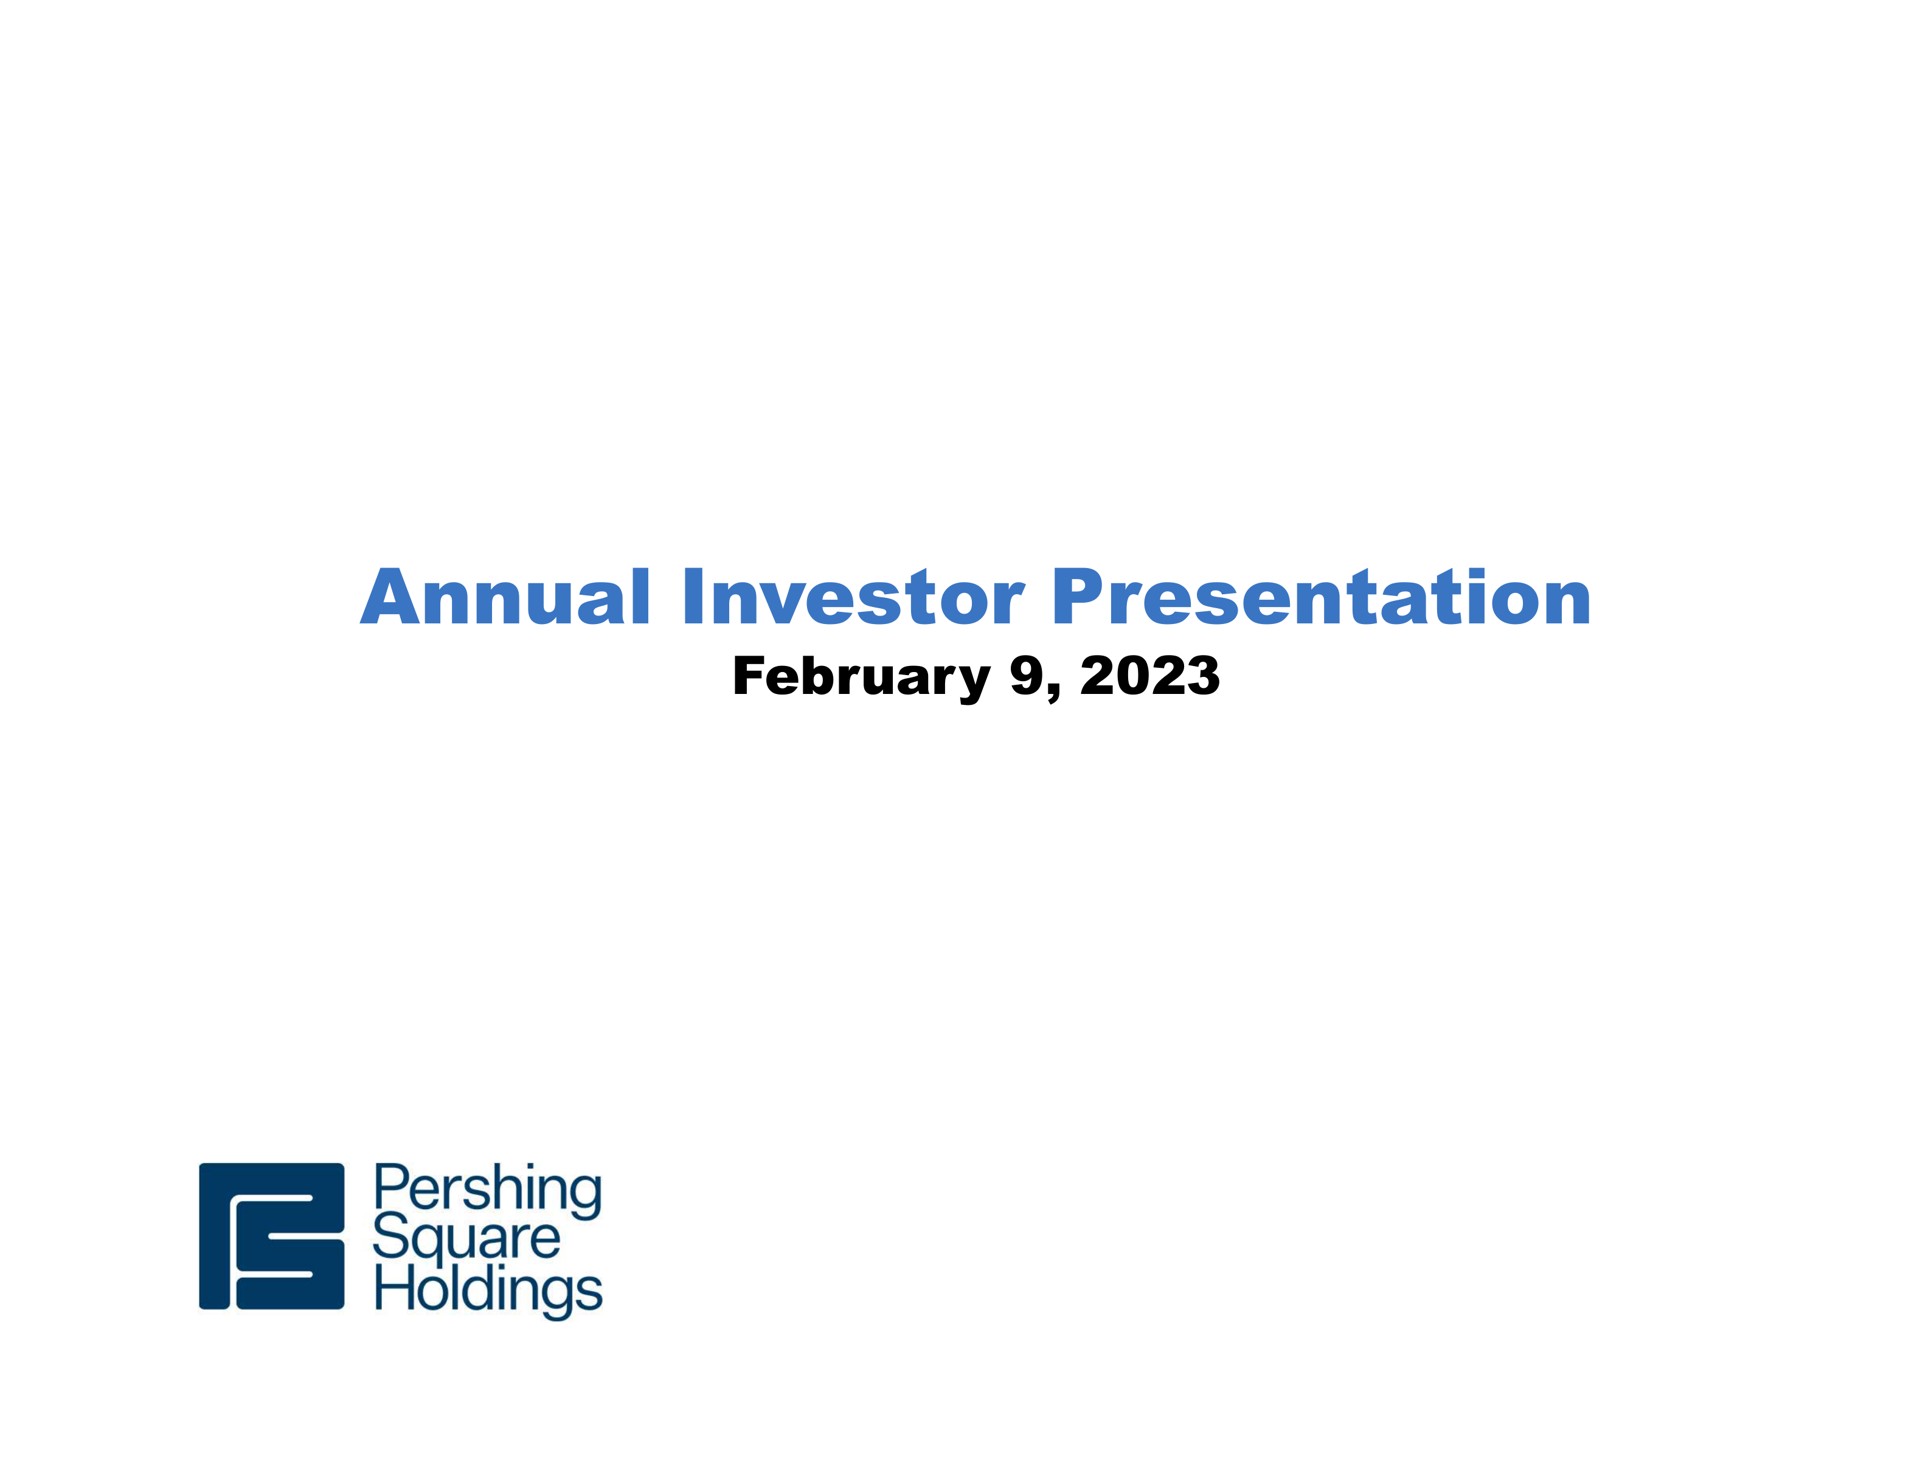 annual investor presentation square holdings | Pershing Square